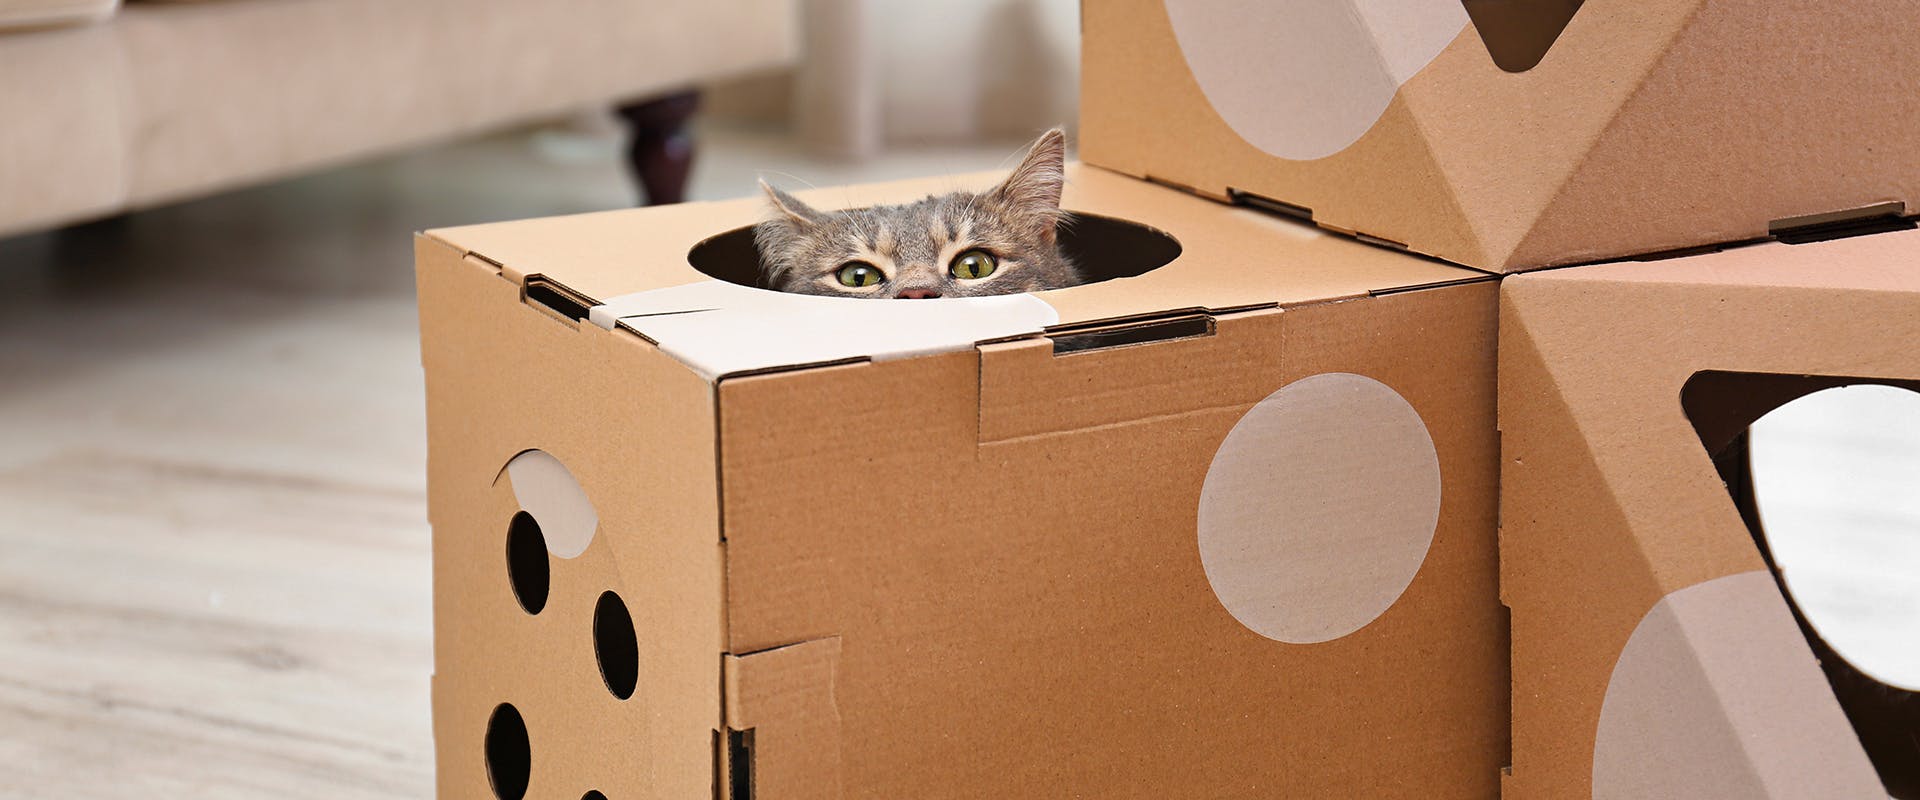 A cat peering out of a cardboard box cat house